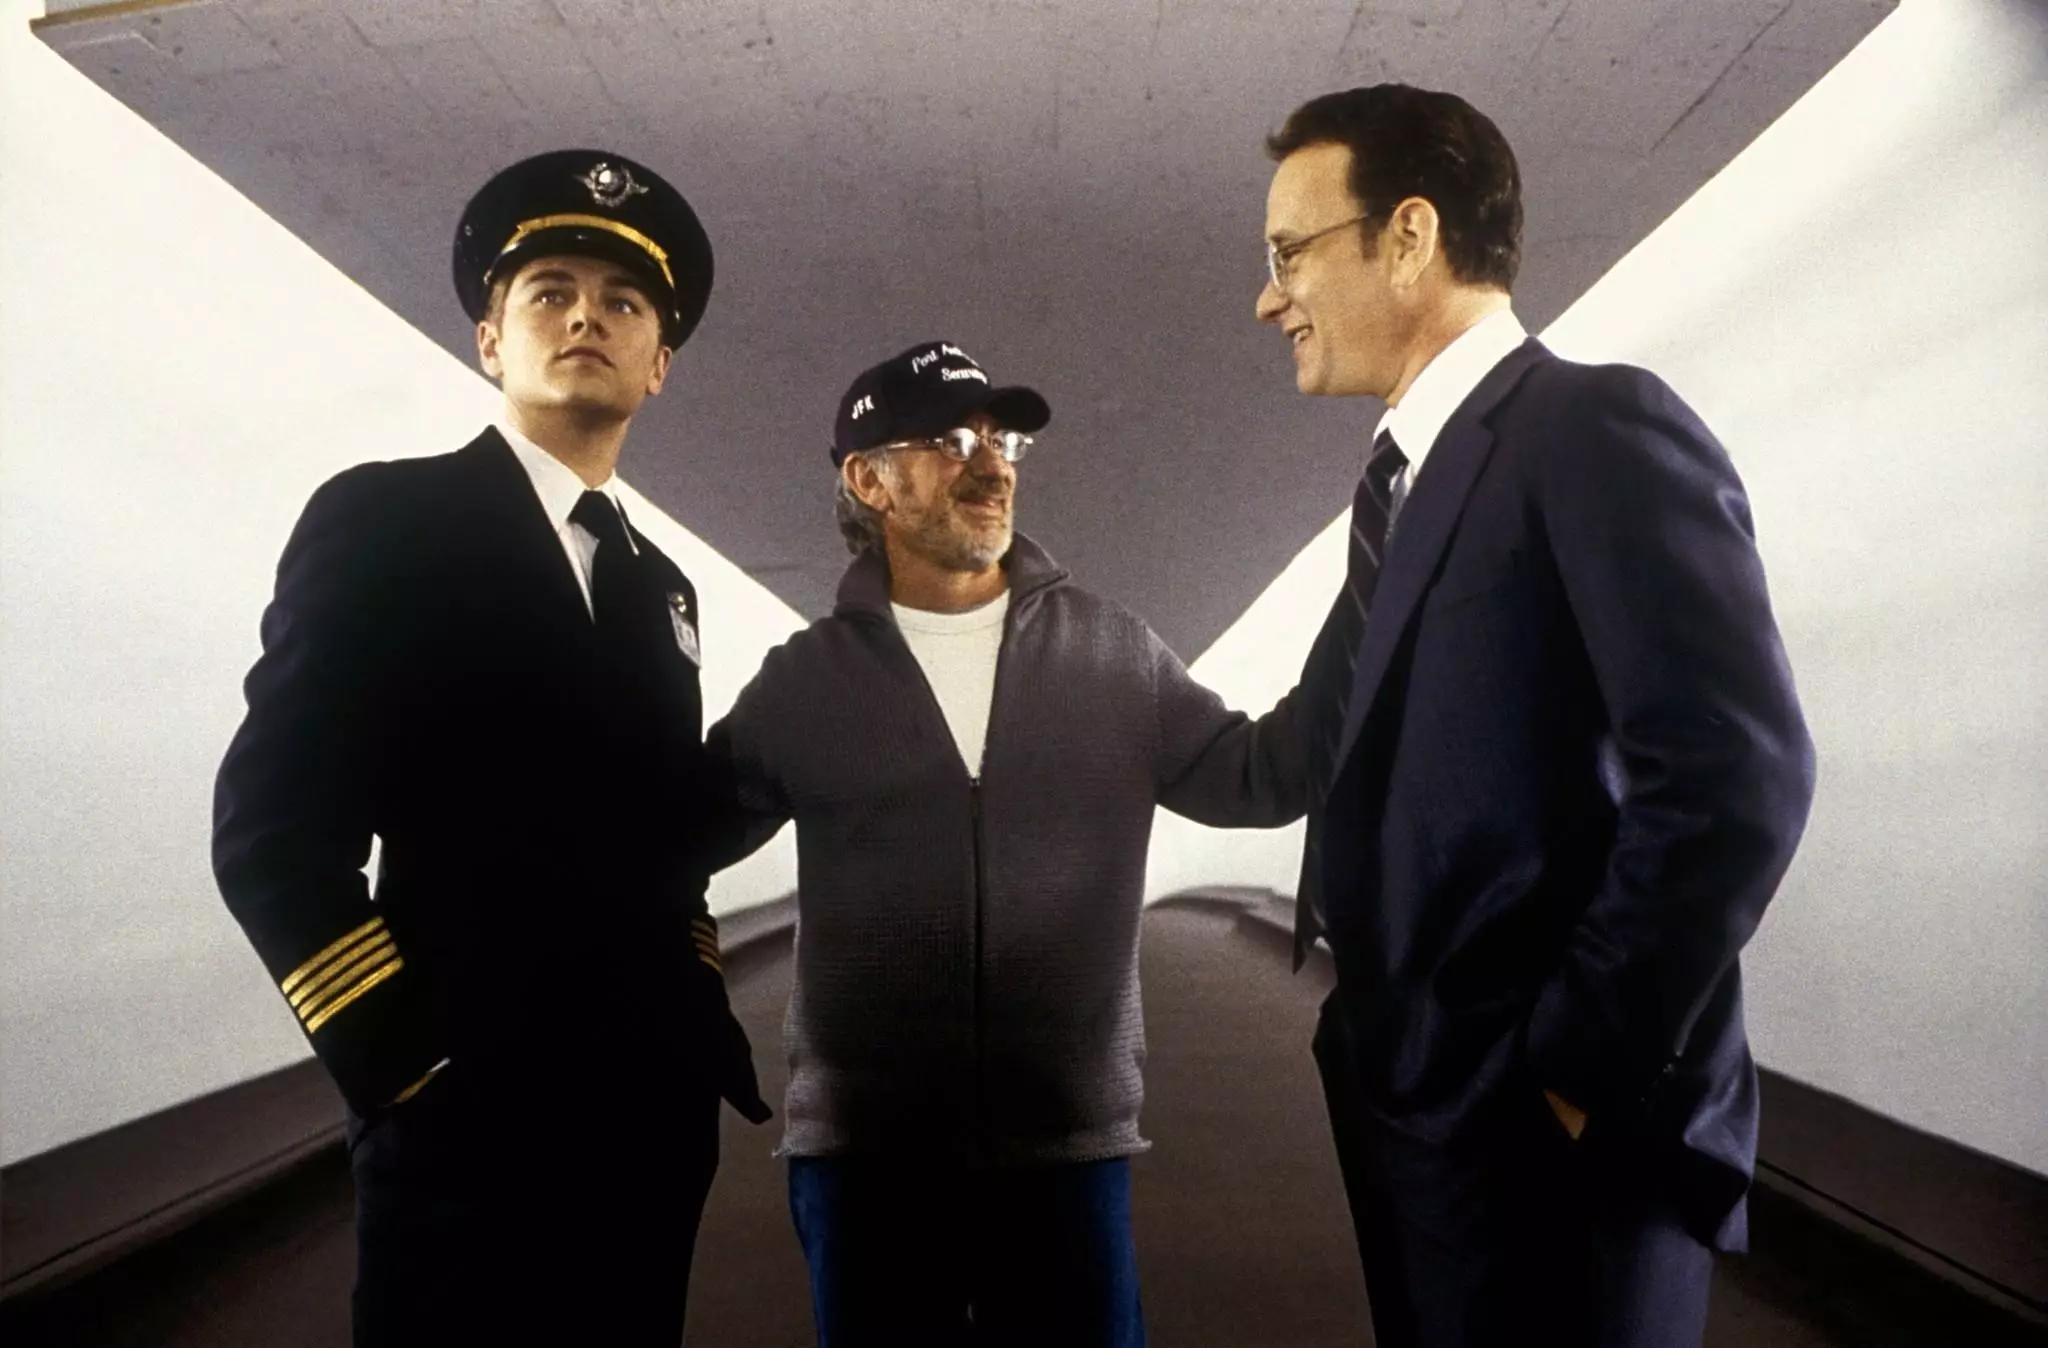 Leo DiCaprio in Catch Me If You Can.